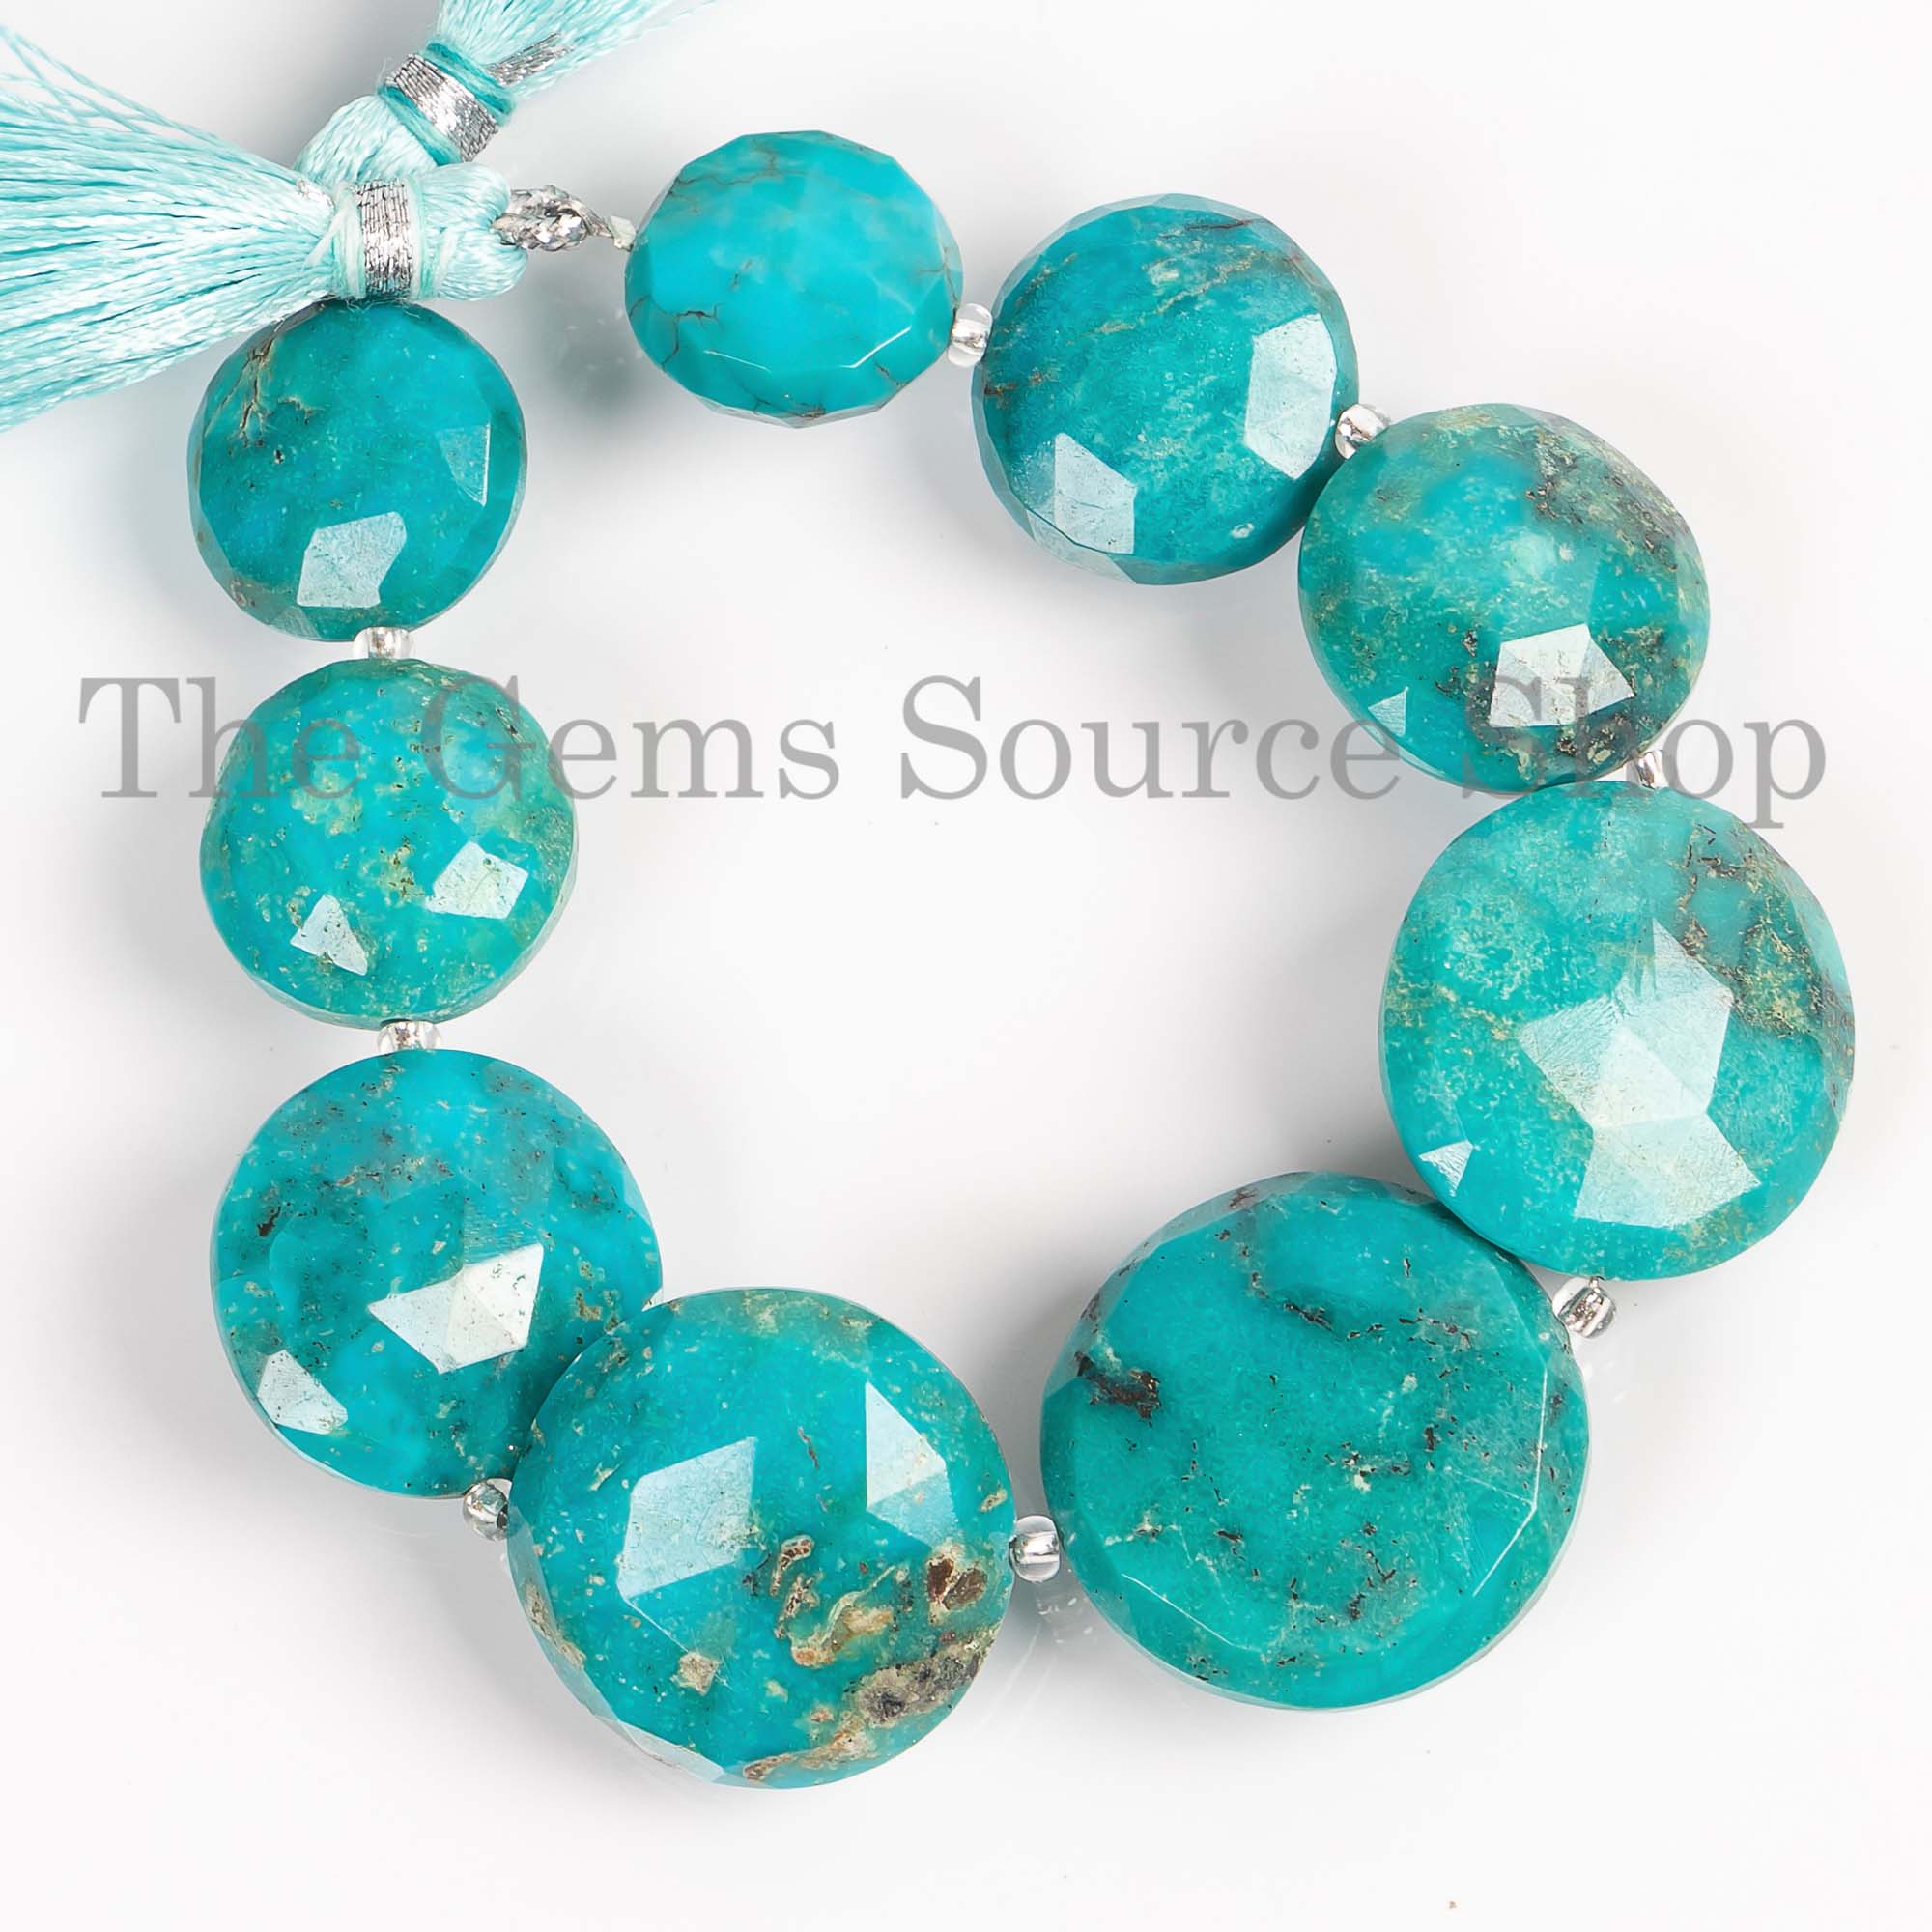 13-21mm Arizona Turquoise Round Coin Faceted Beads Gemstone, TGS-4393